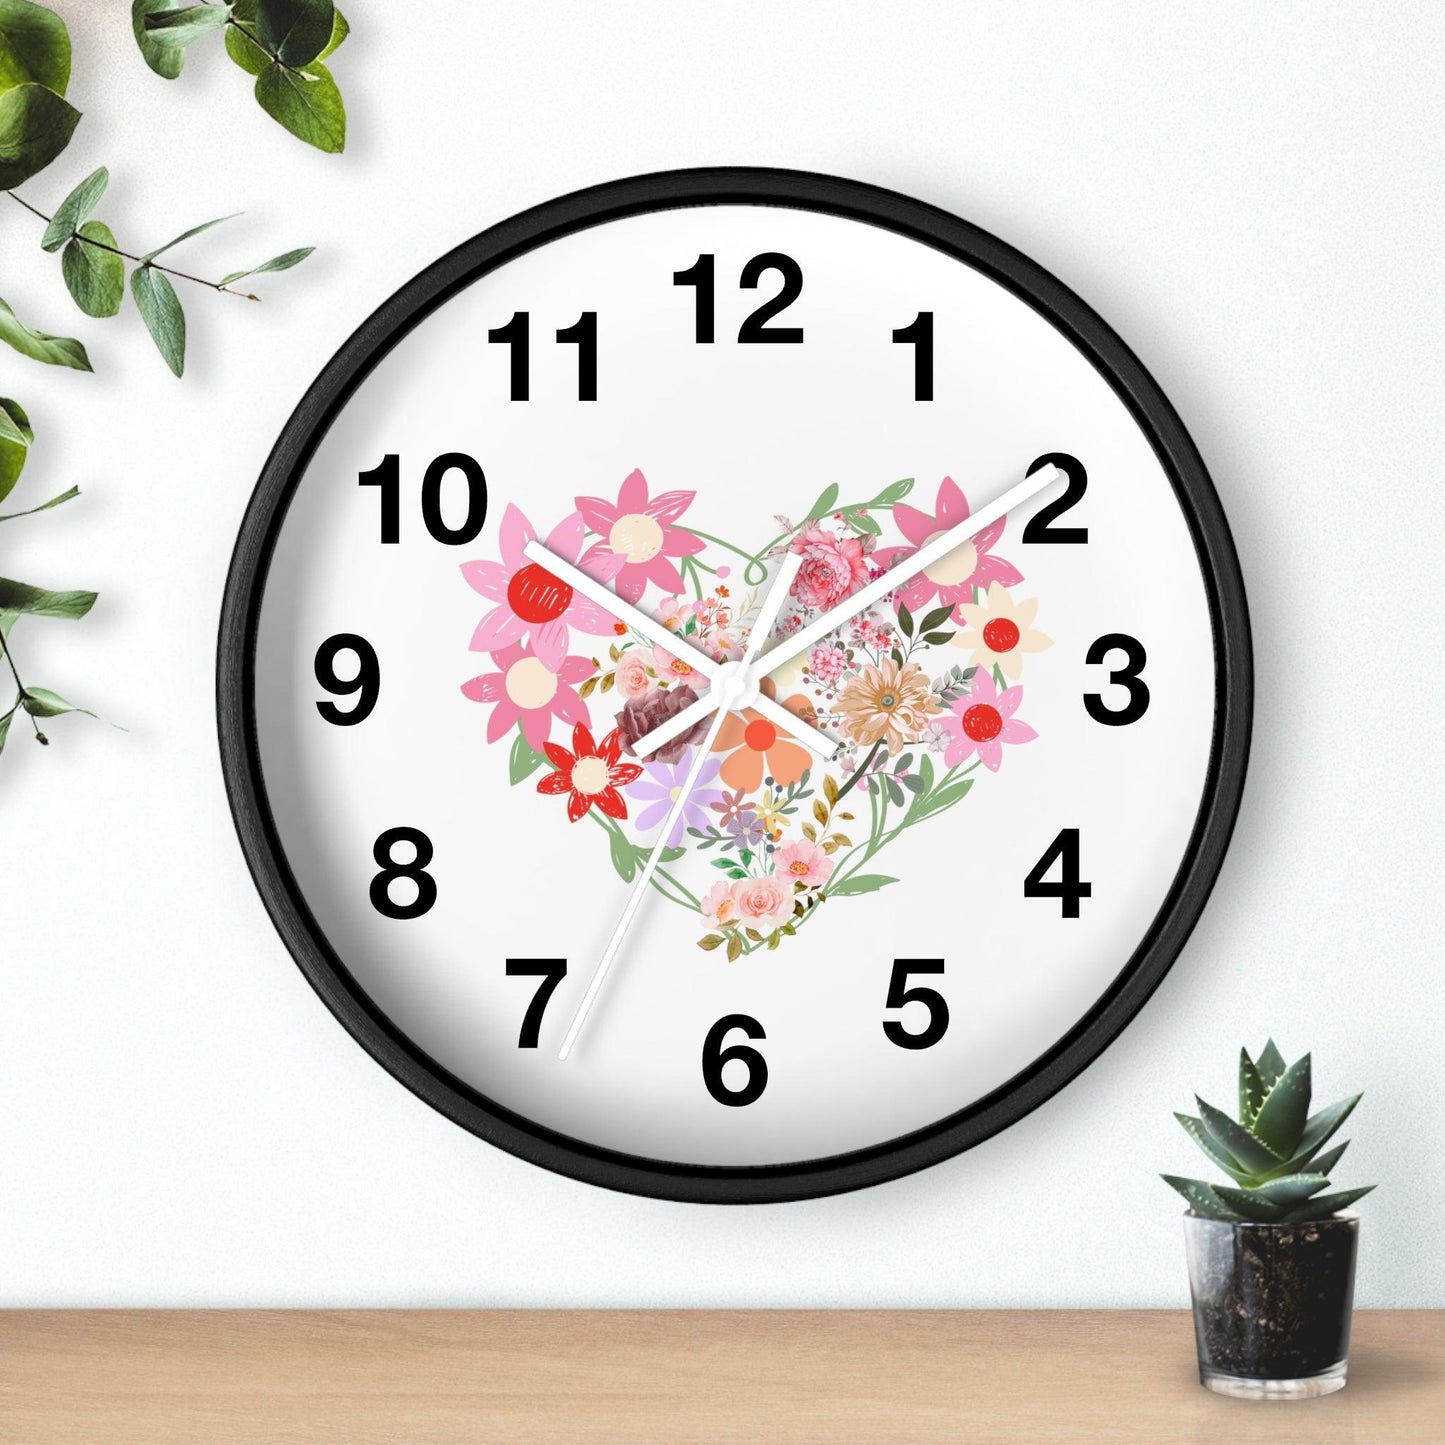 Flower wall clock, Flower Heart Wall clock, Floral Wall Clock, Home decor gift, House Warming gift, New Home Gift, Mom gift